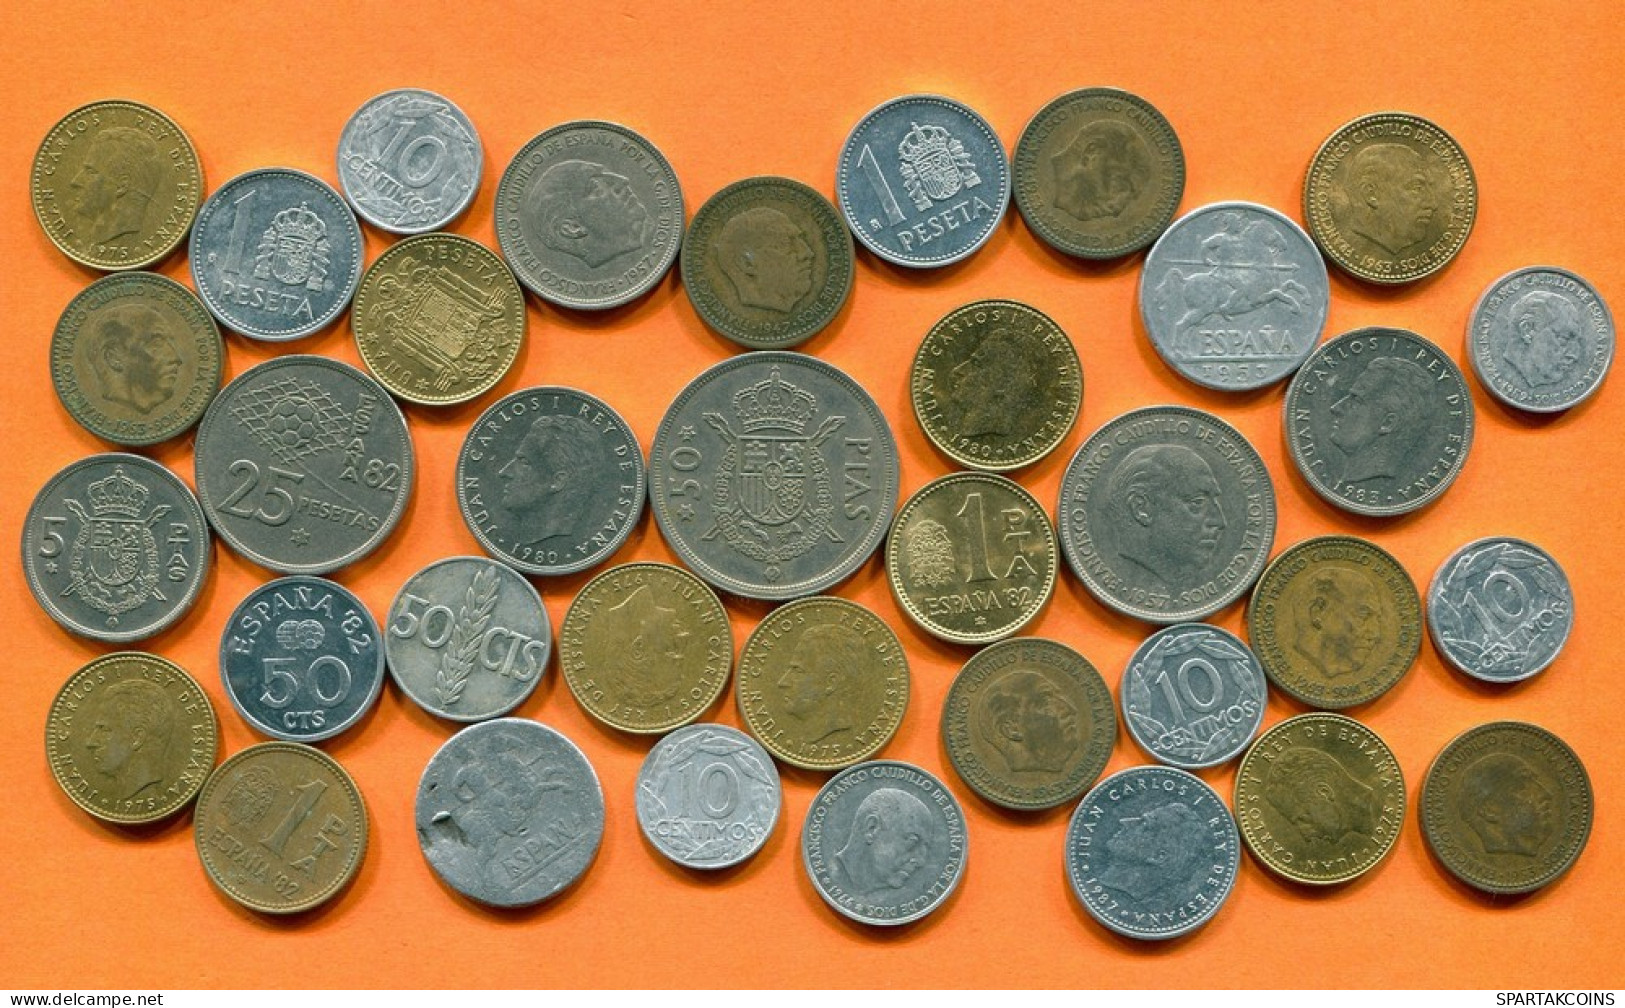 SPAIN Coin SPANISH Coin Collection Mixed Lot #L10258.2.U -  Colecciones